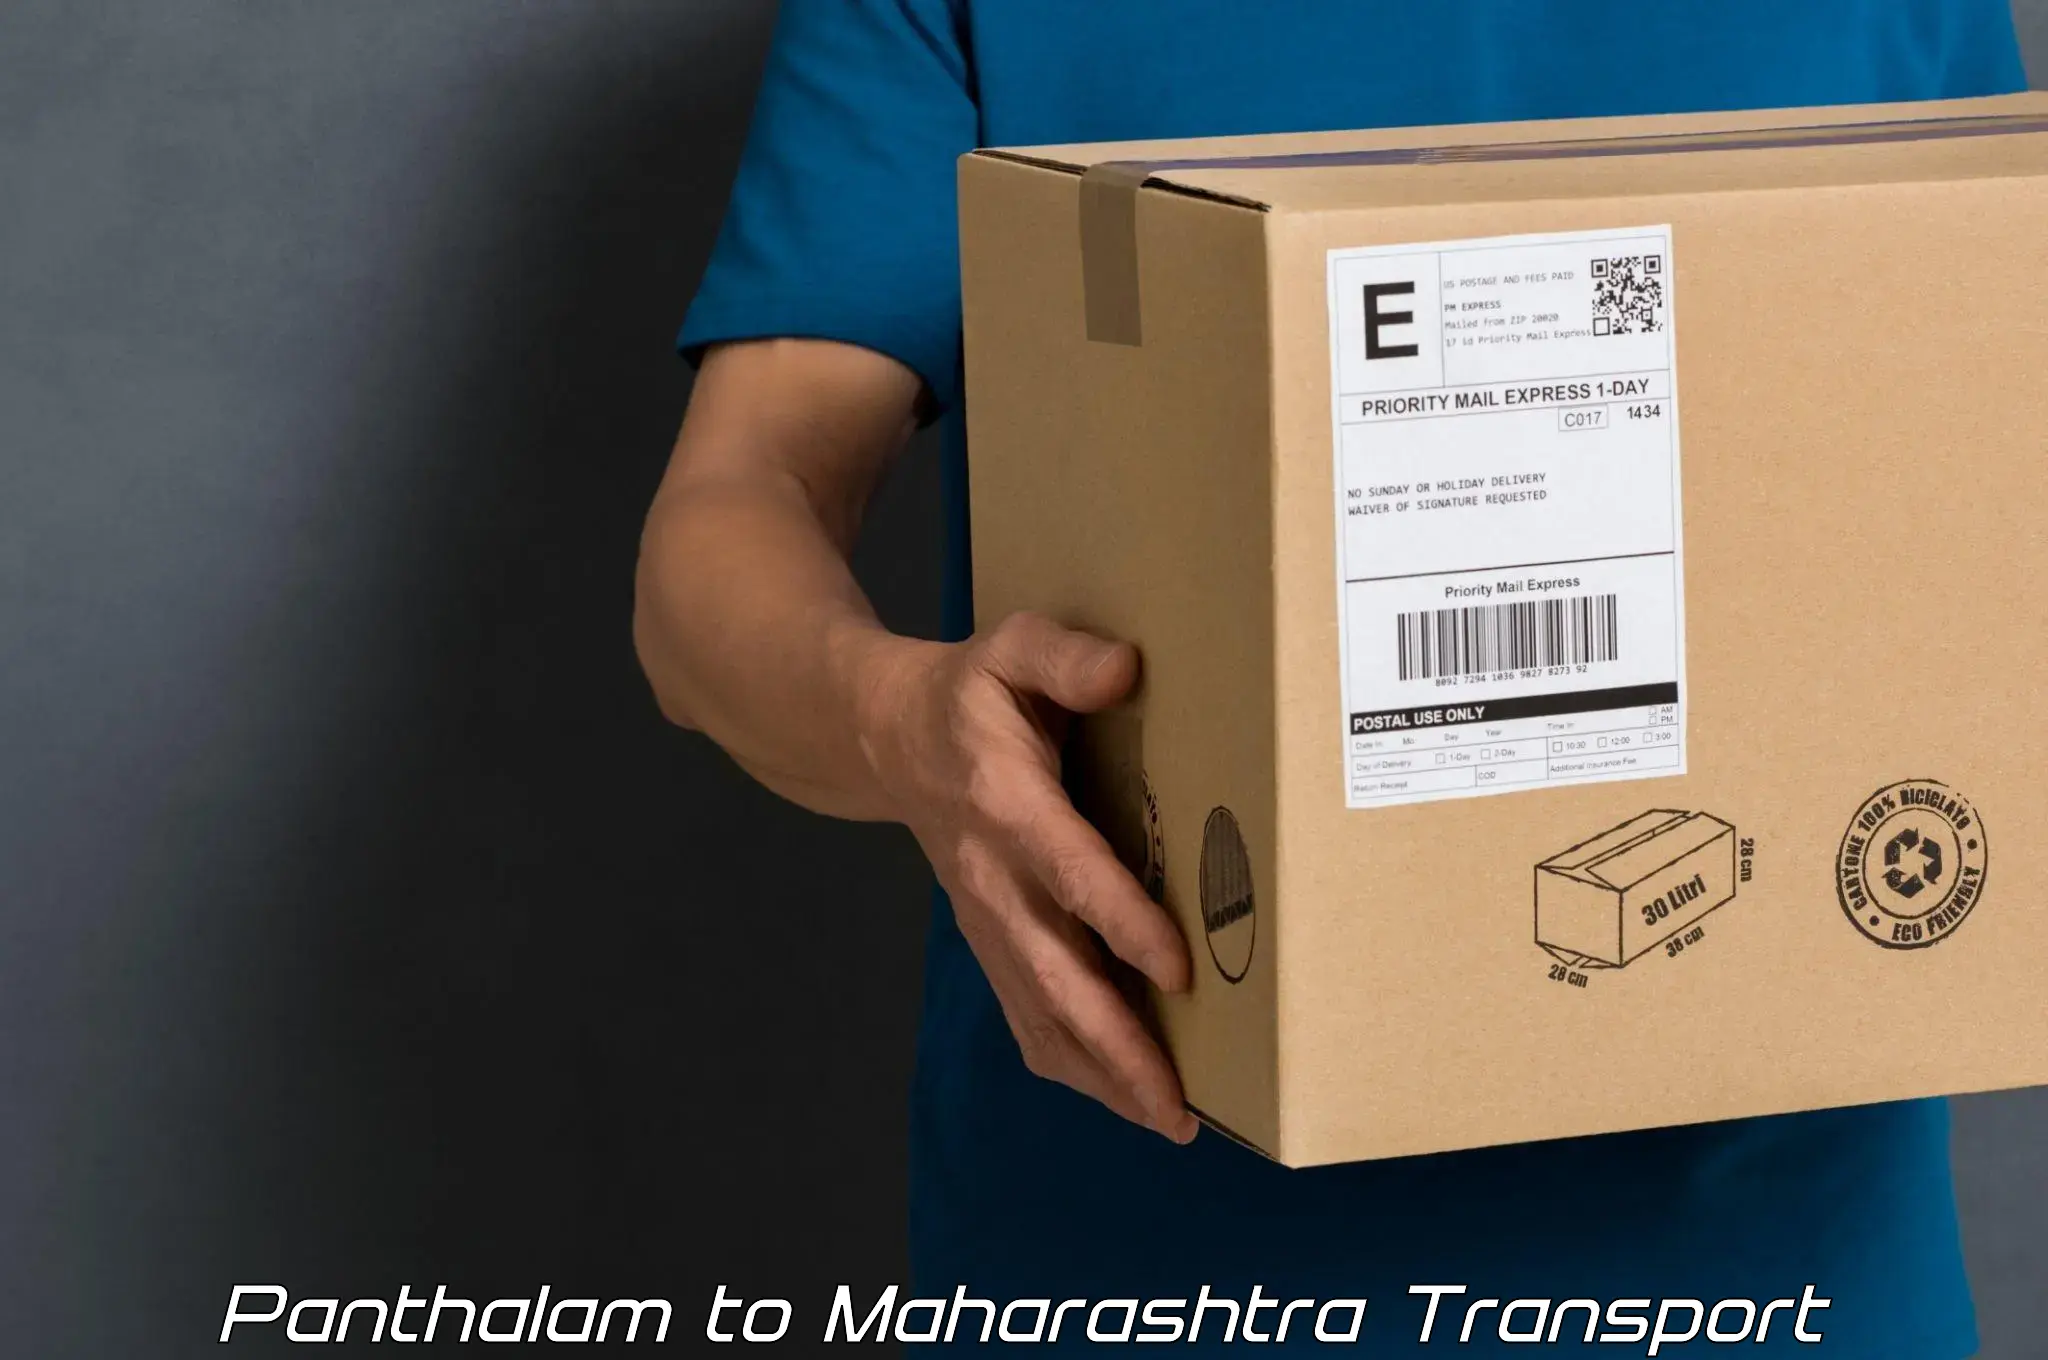 Air freight transport services Panthalam to Talegaon Dabhade